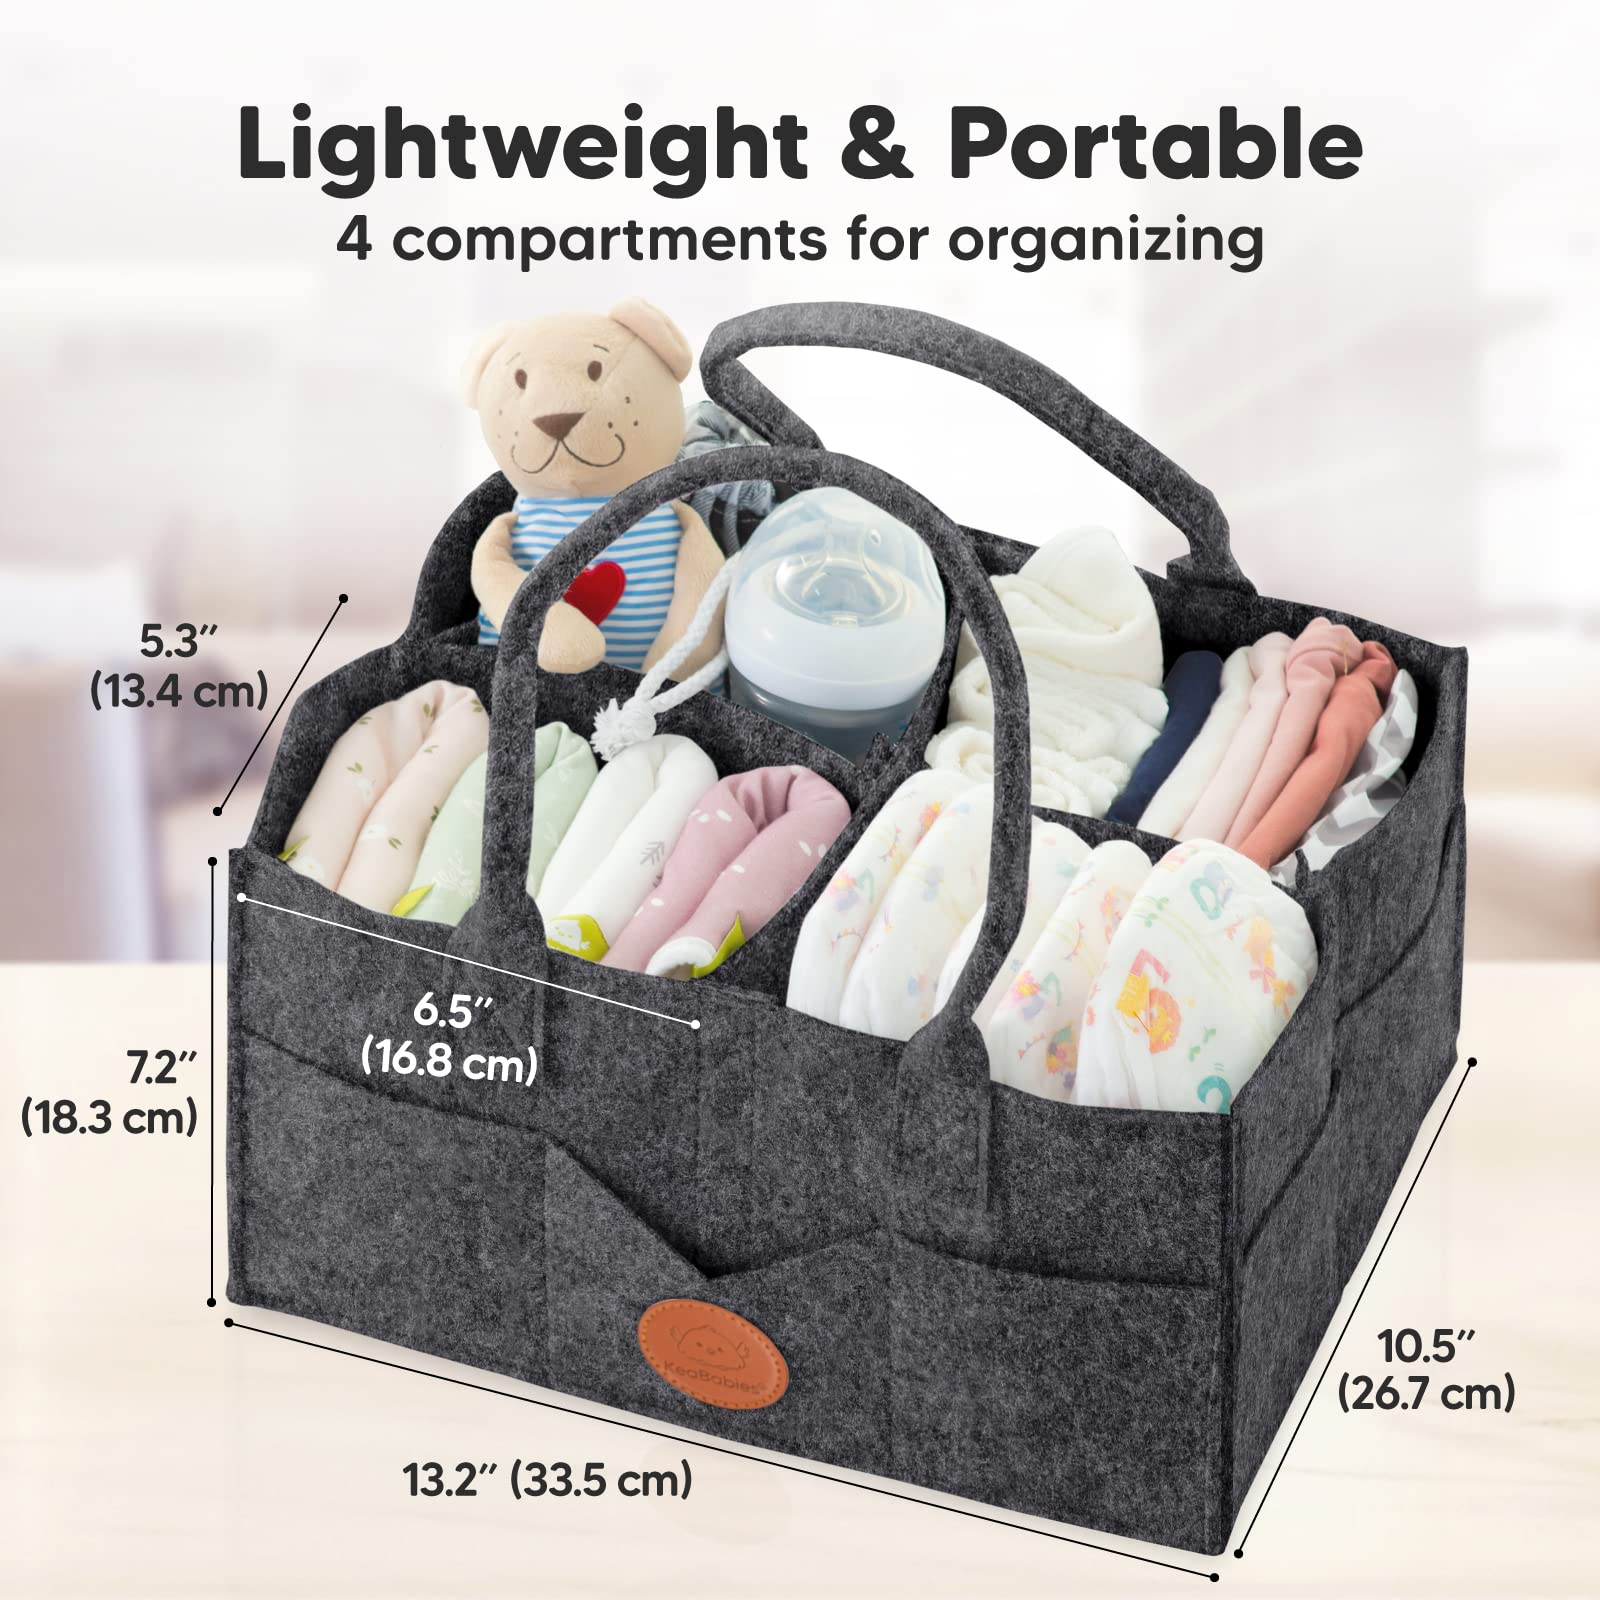 KeaBabies Baby Wrap Carrier and KeaBabies Diaper Caddy Organizer - All in 1 Original Breathable Baby Sling, Baby Organizer for Nursery, Lightweight,Hands Free Baby Carrier Sling